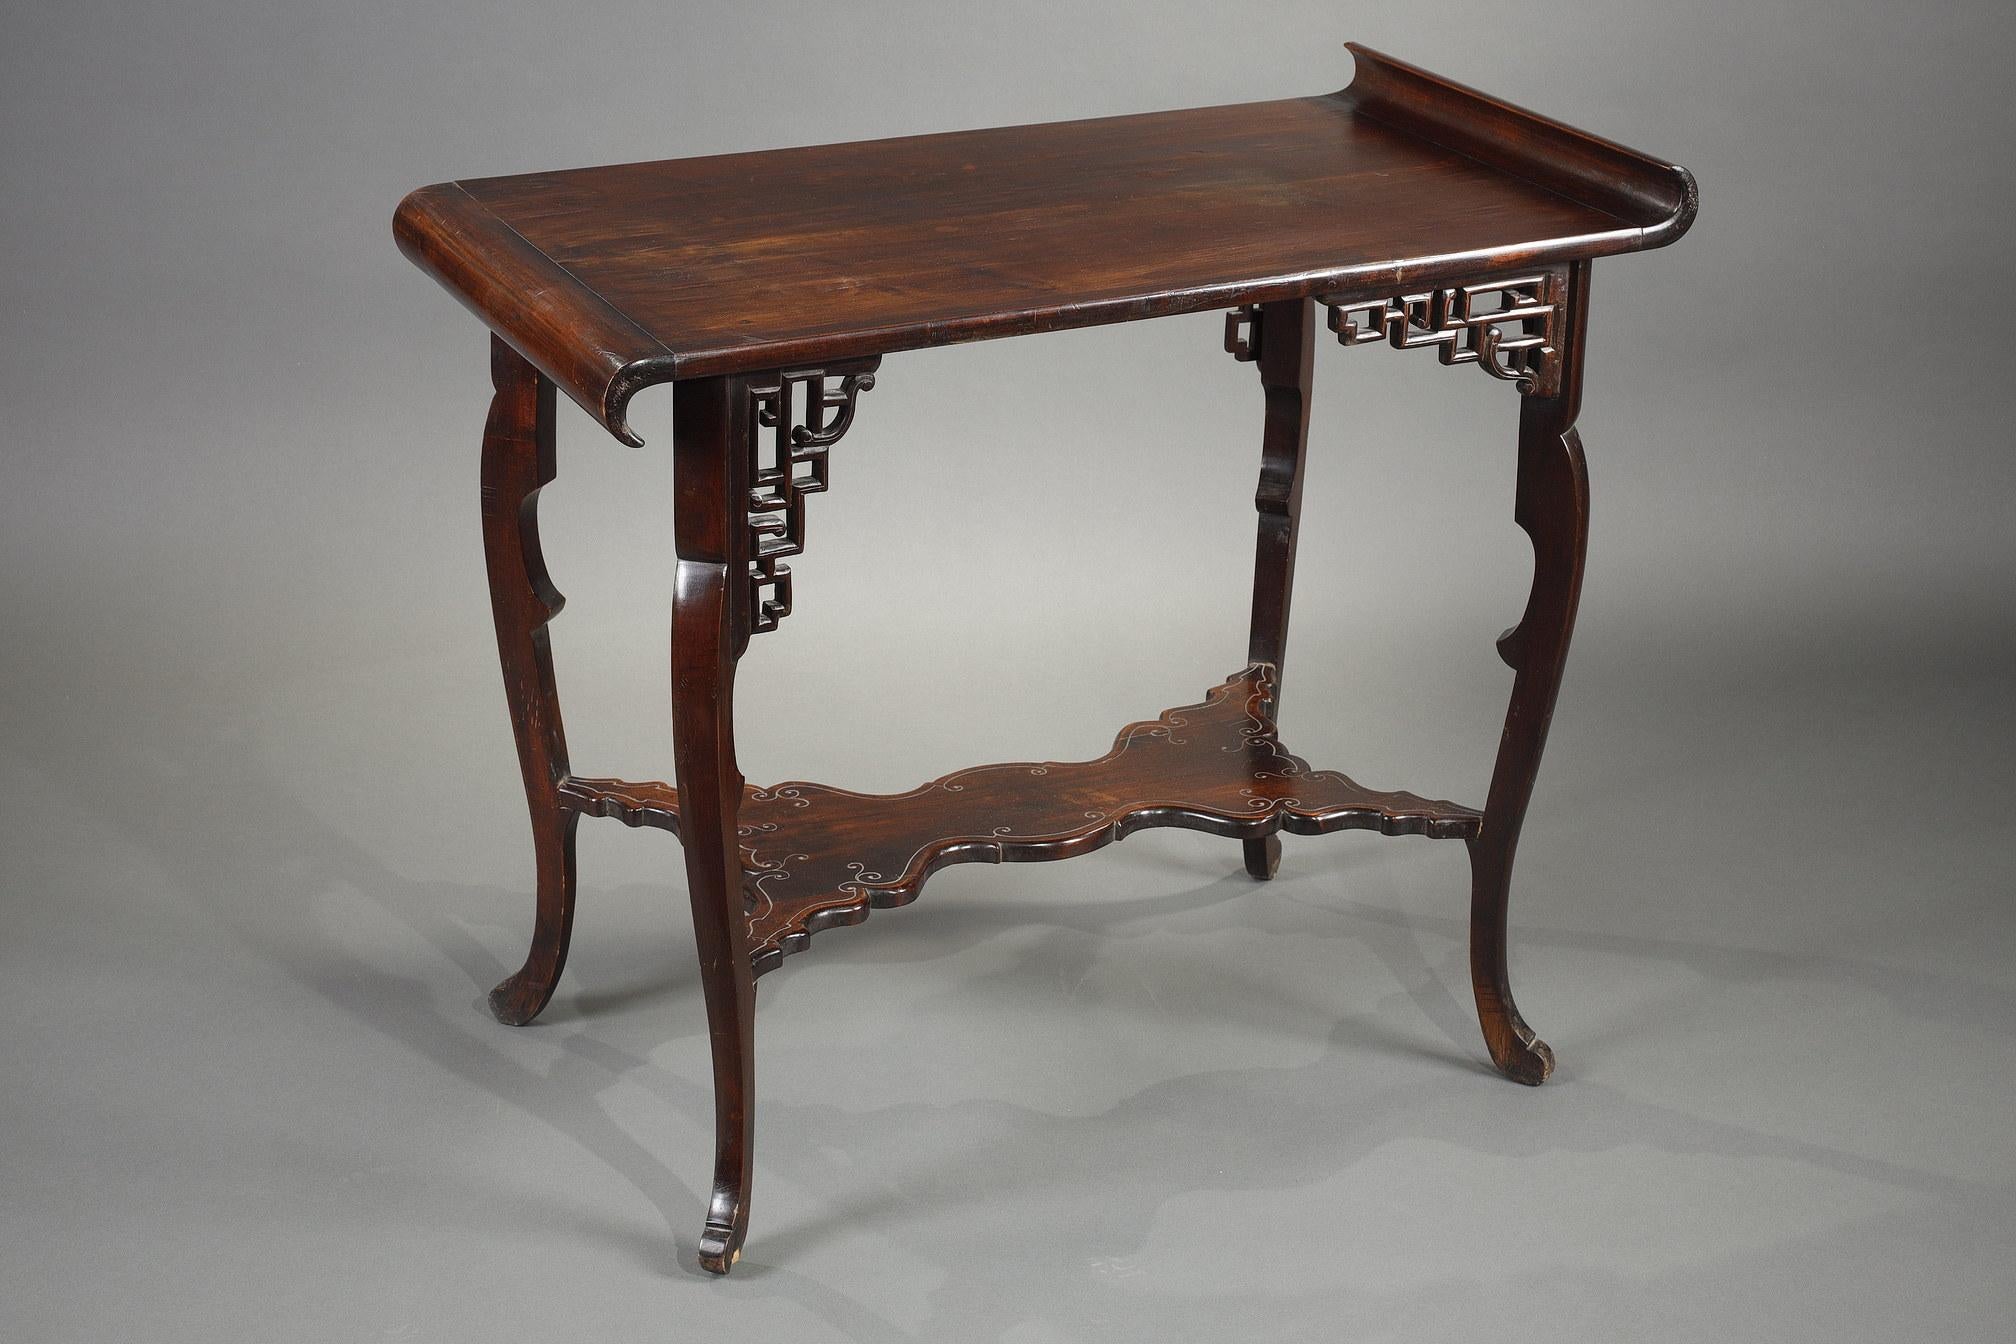 Charming Japanese-inspired « pagoda » table in tinted and carved wood attributed to G. Viardot. The rectangular top rests on four slightly curved legs adorned with openwork and sculpted geometric interlacing, joined by an engraved stretcher with a